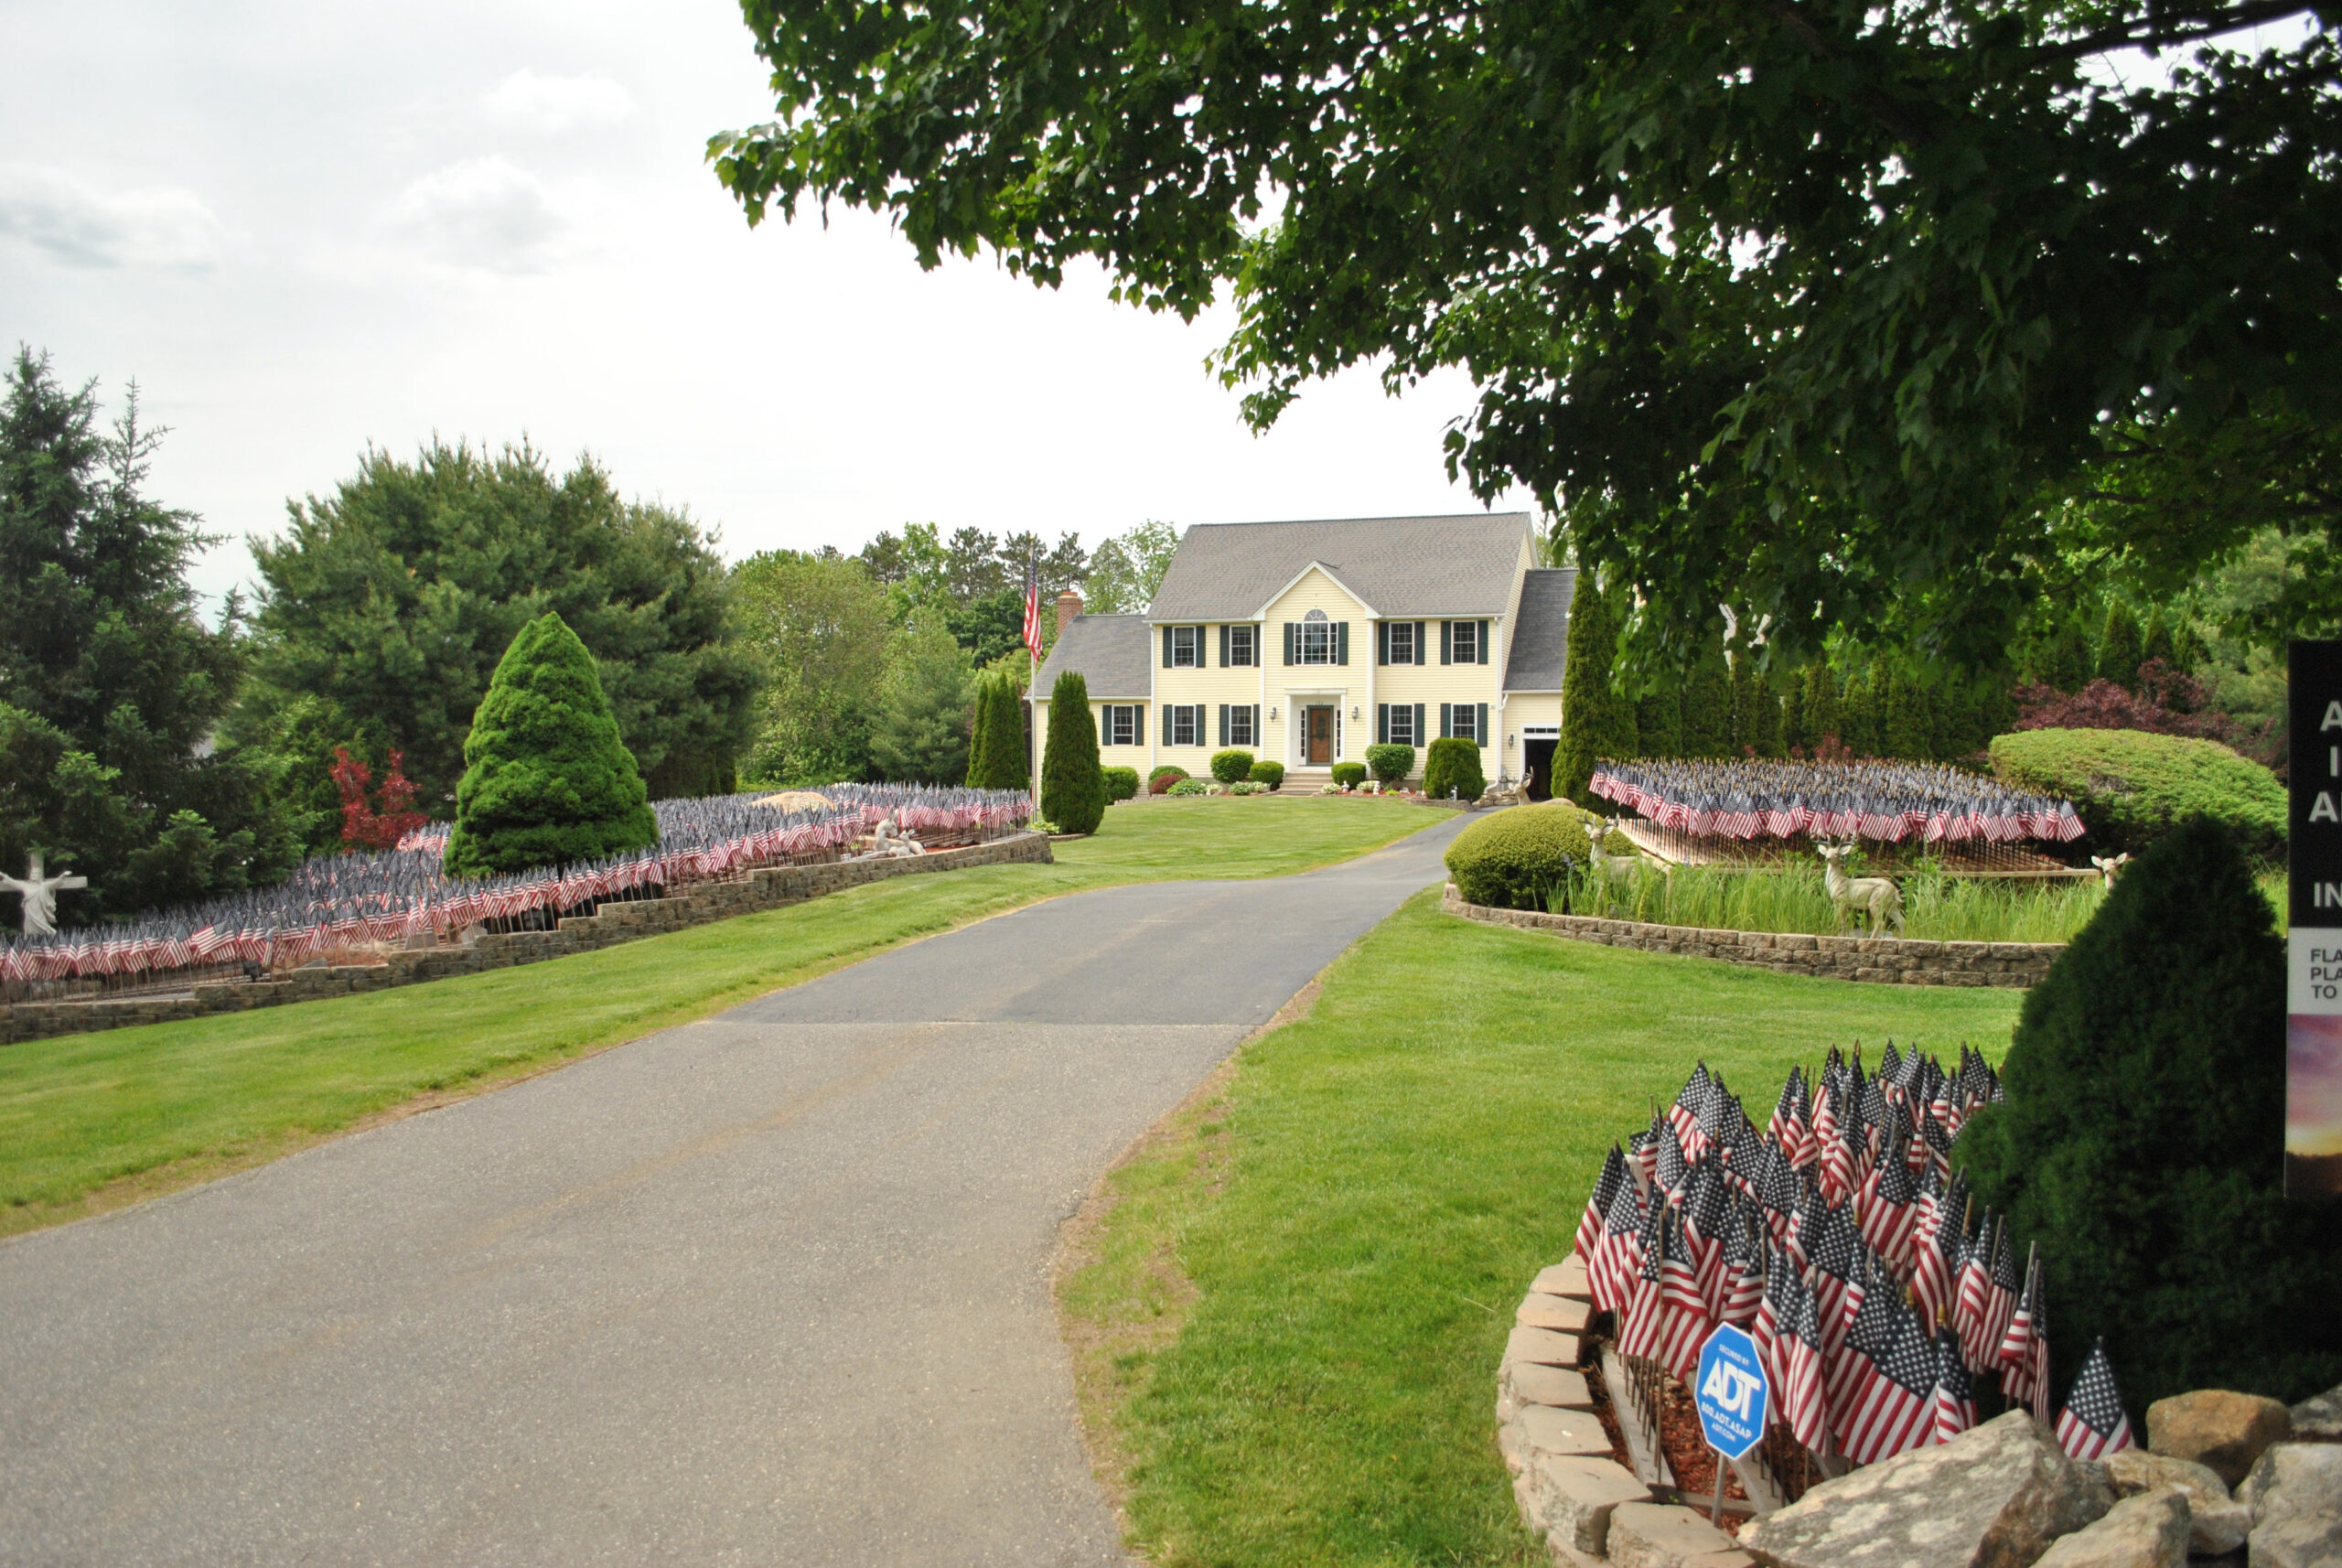 Flags fill the flower beds of Mike Labee’s property in Grafton.